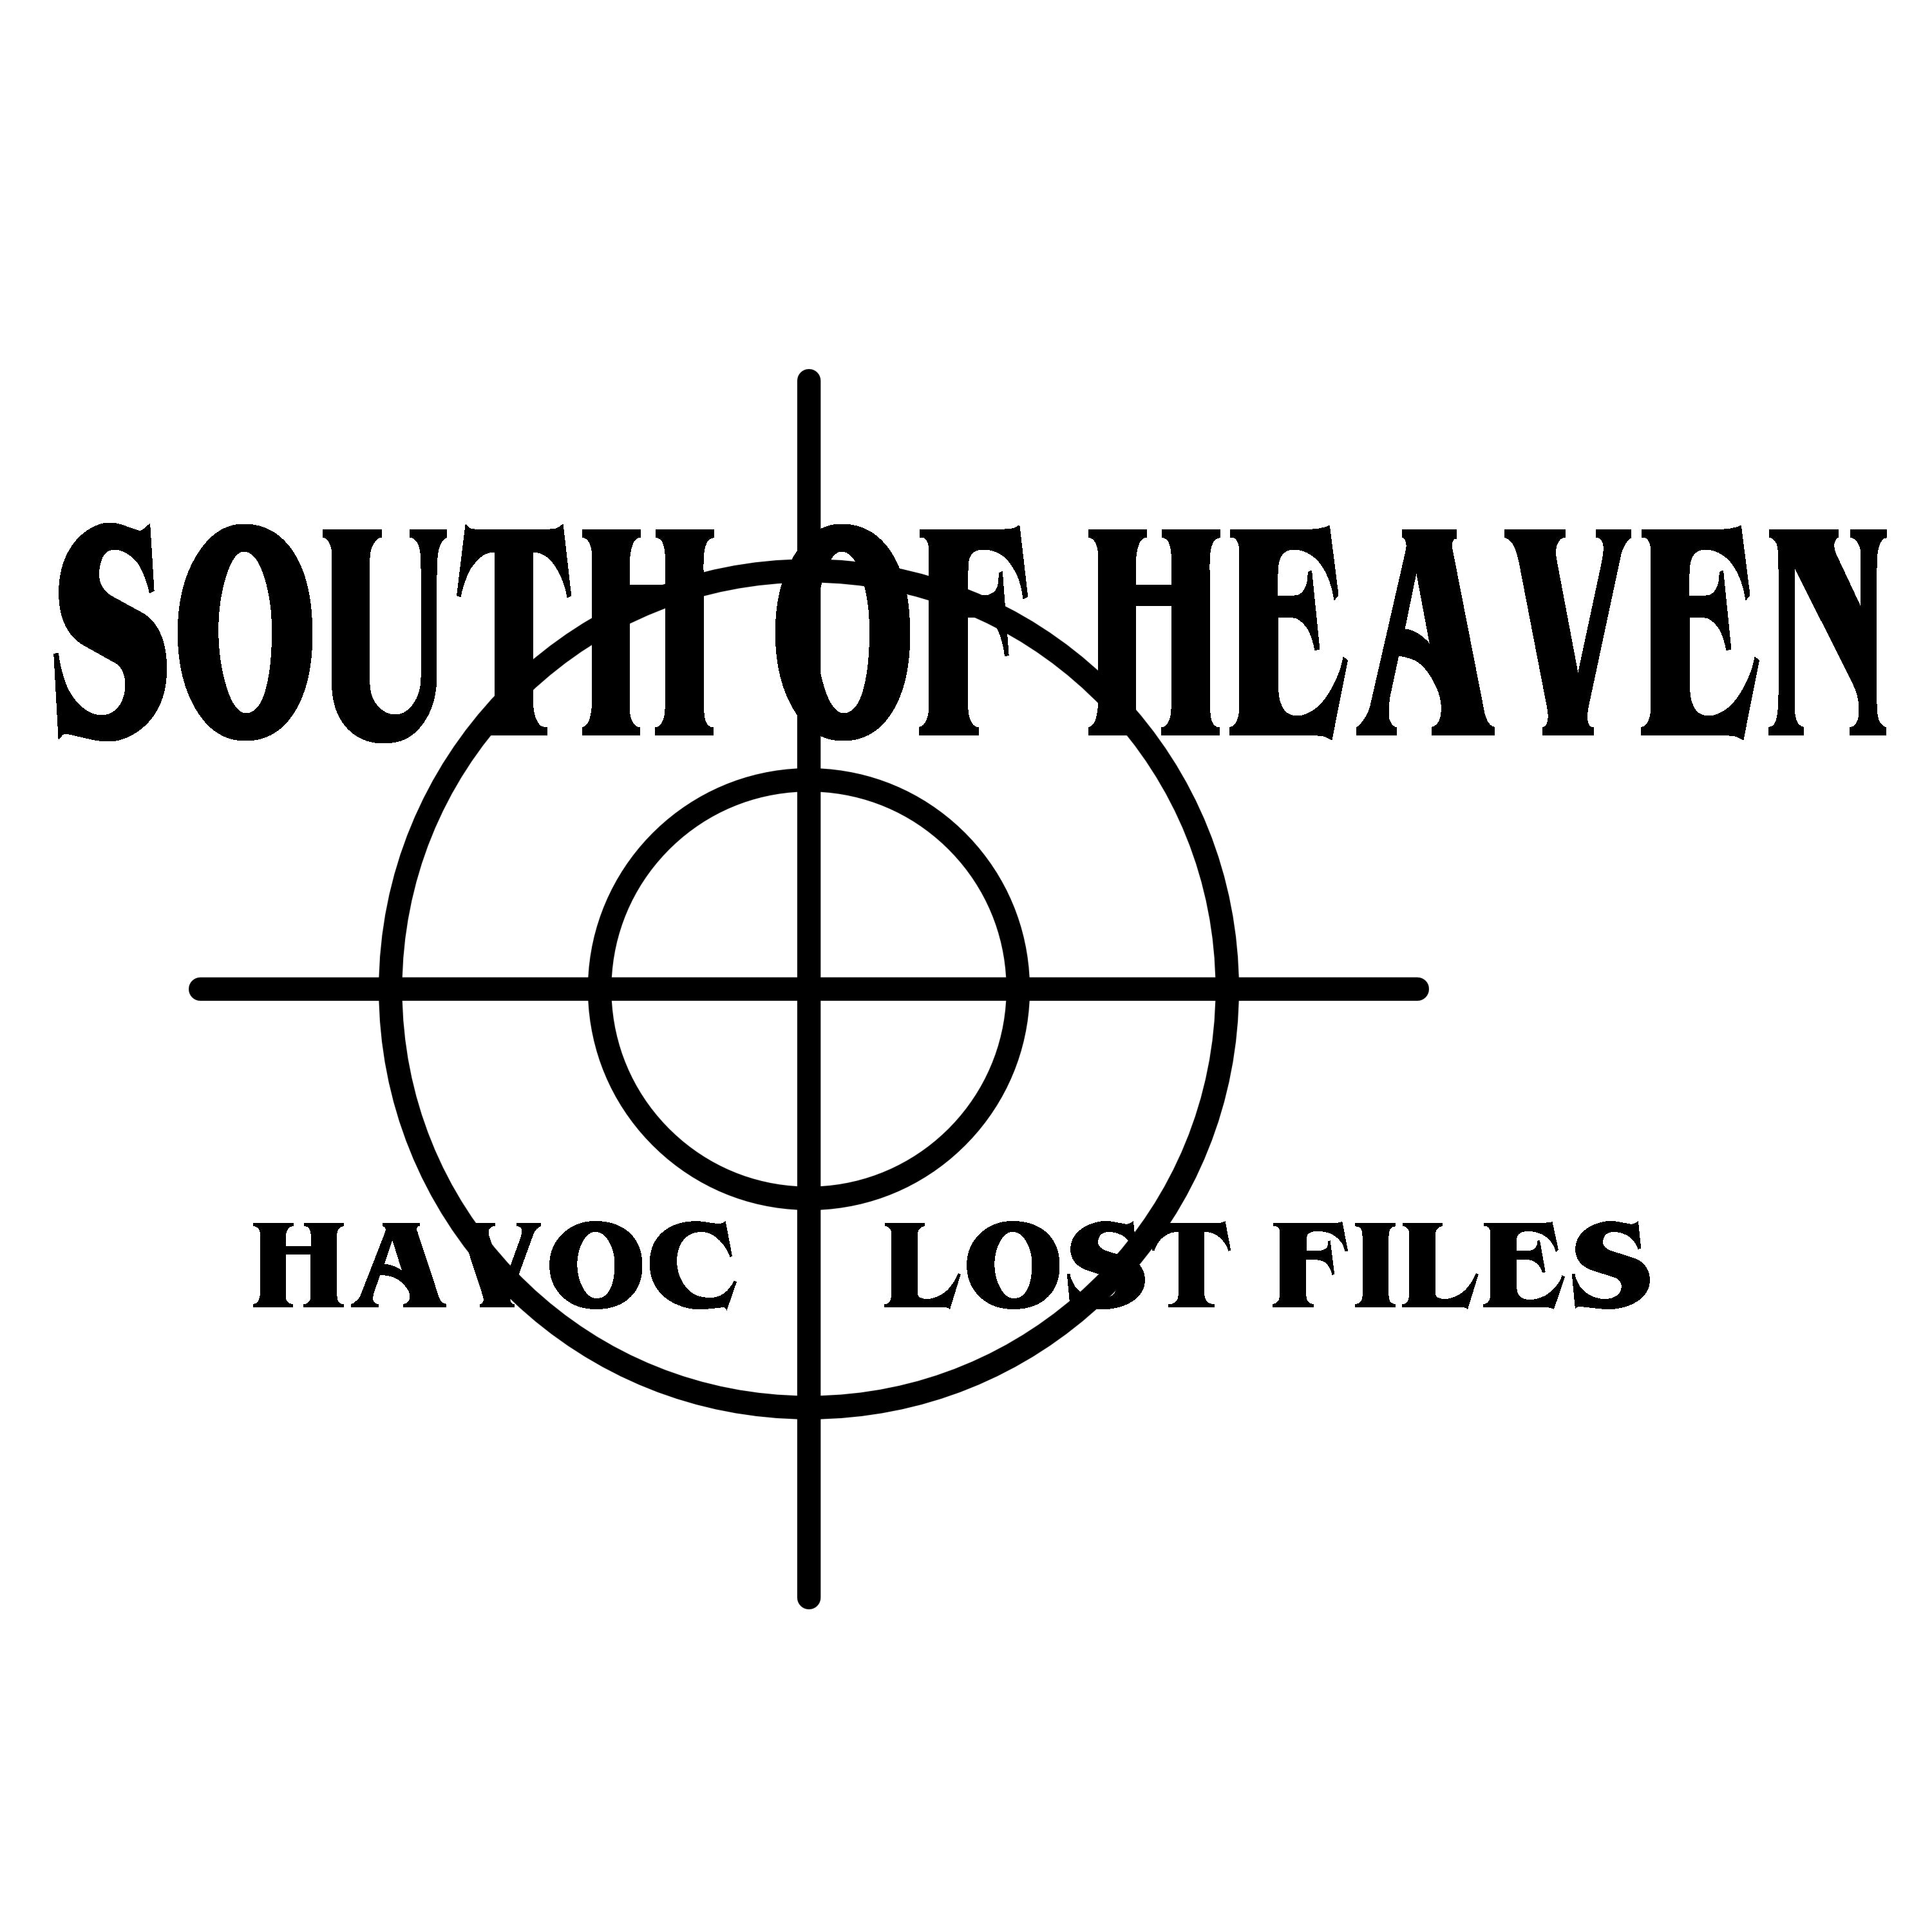 South Of Heaven Wallpapers